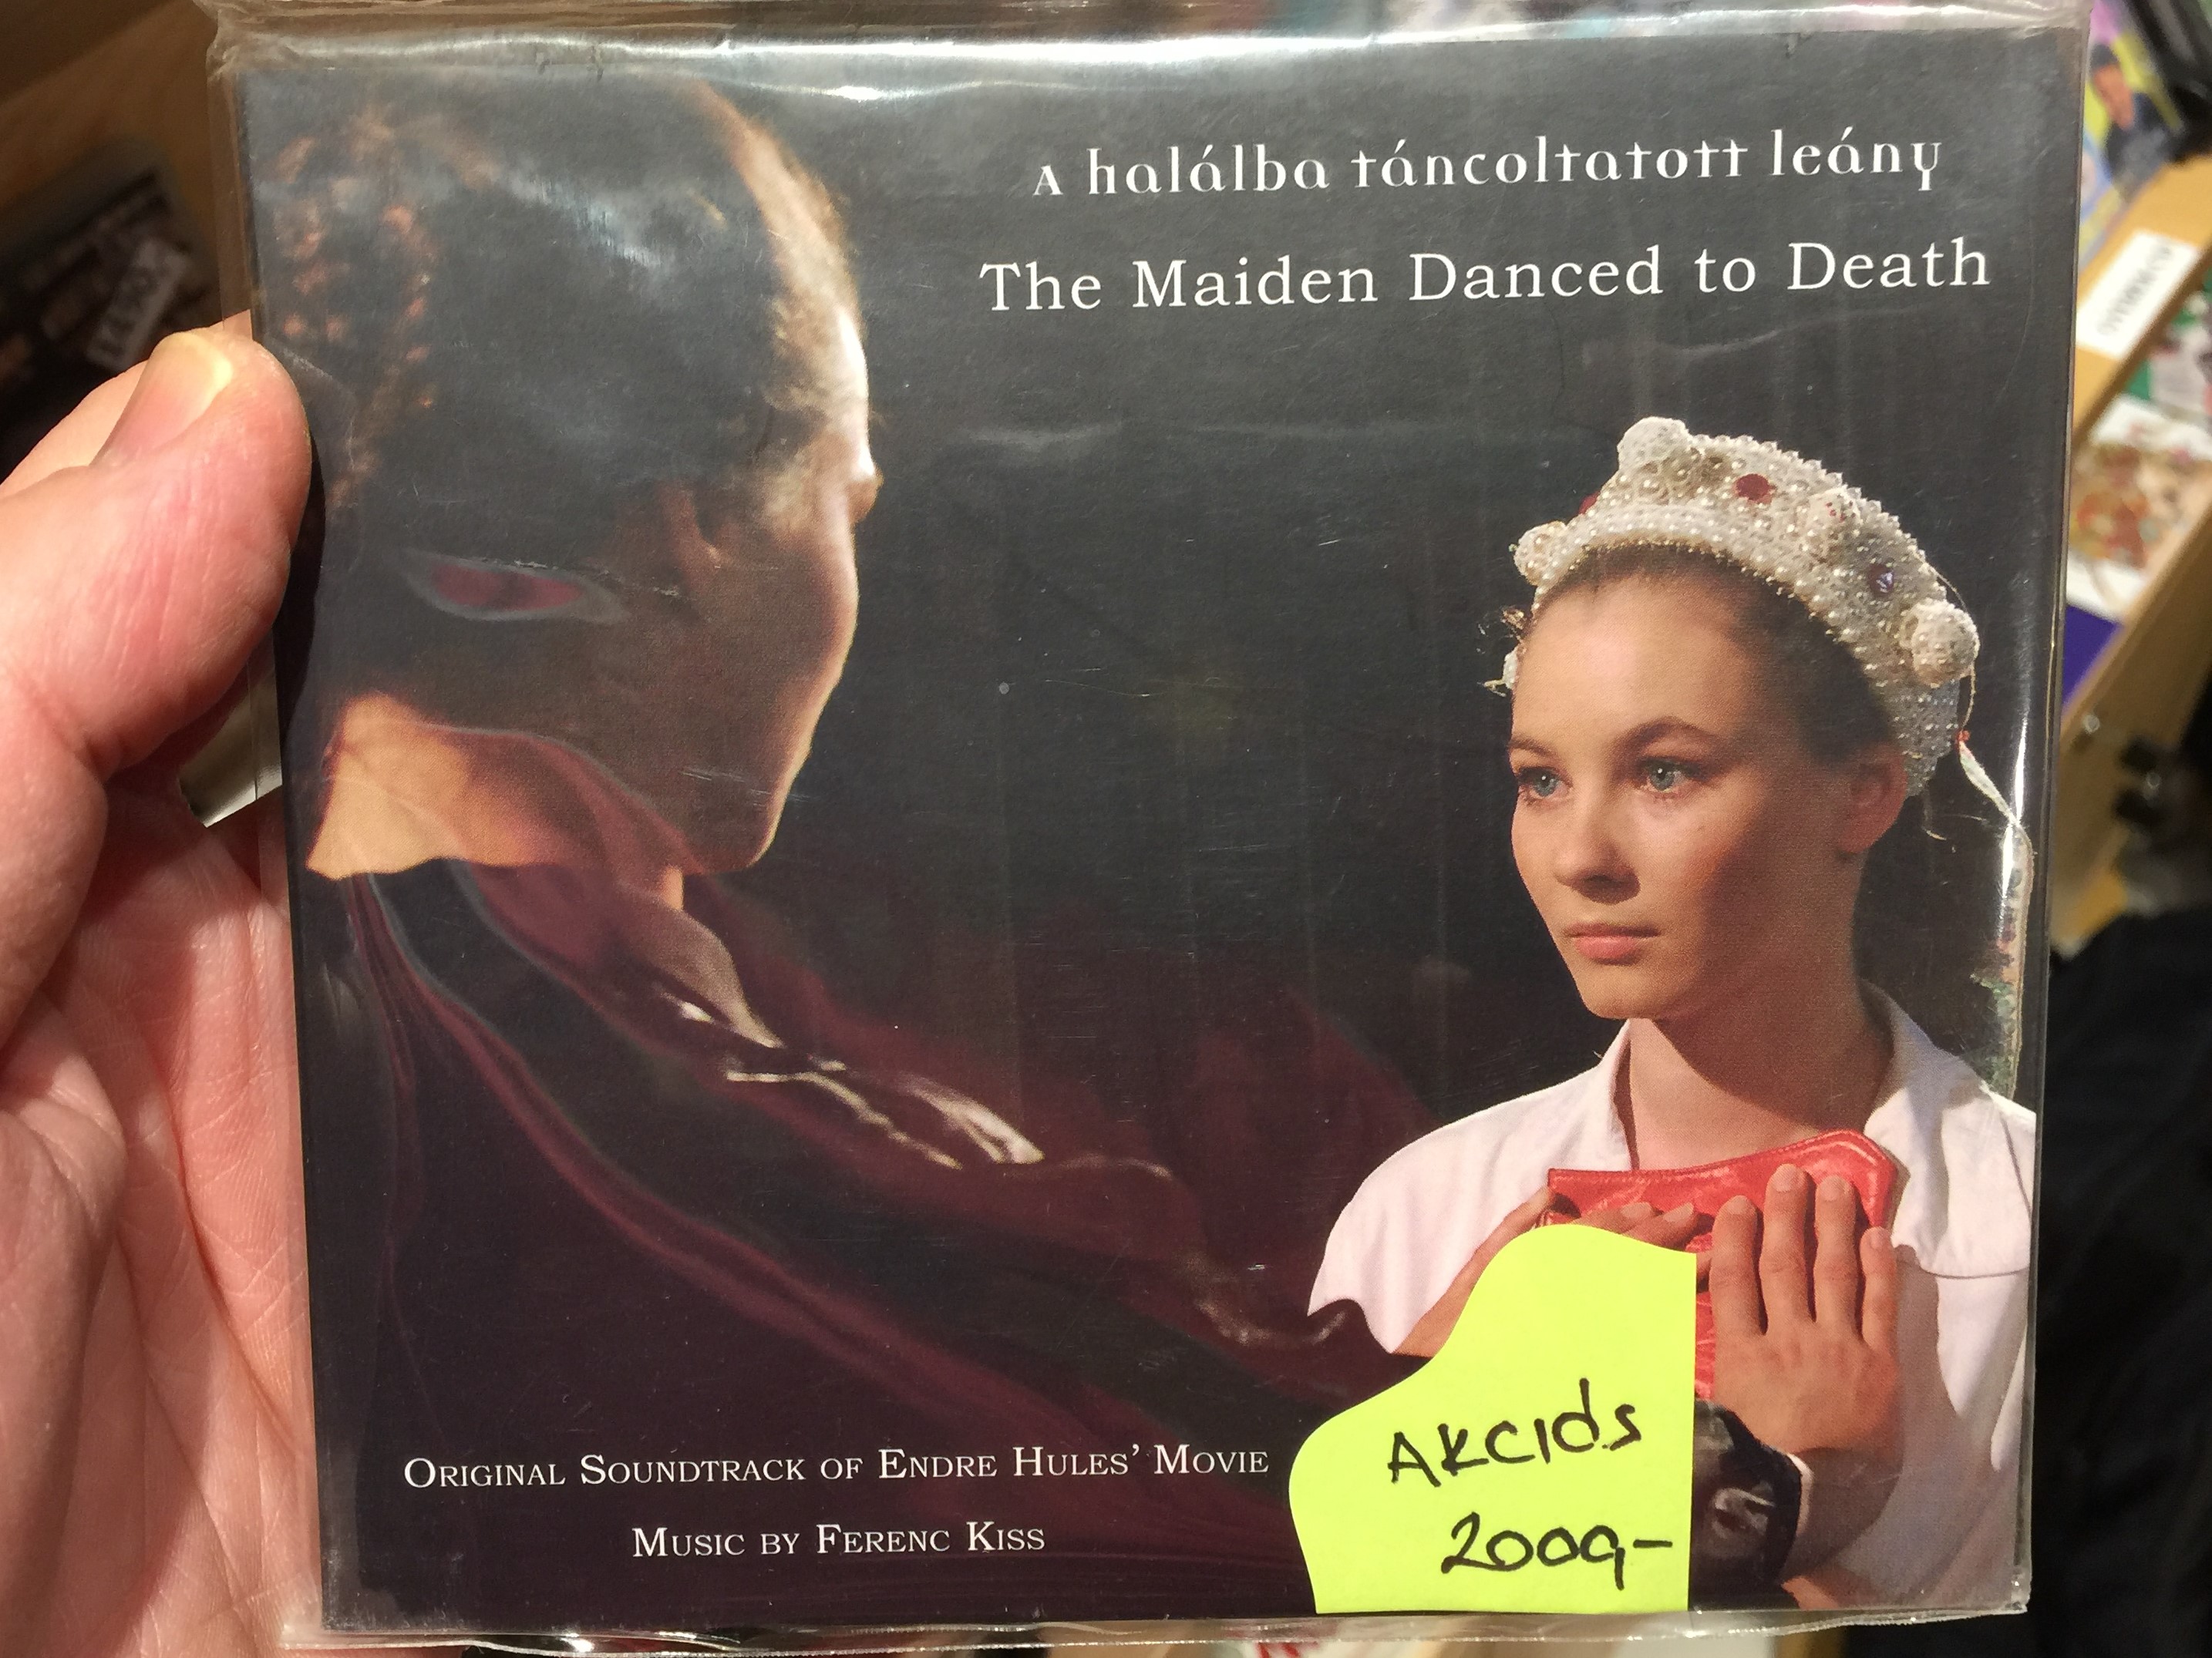 a-hal-lba-t-ncoltatott-le-ny-the-maiden-danced-to-death-original-soundtrack-of-endre-hules-movie-music-by-ferenc-kiss-etnofon-audio-cd-2011-er-cd-106-1-.jpg